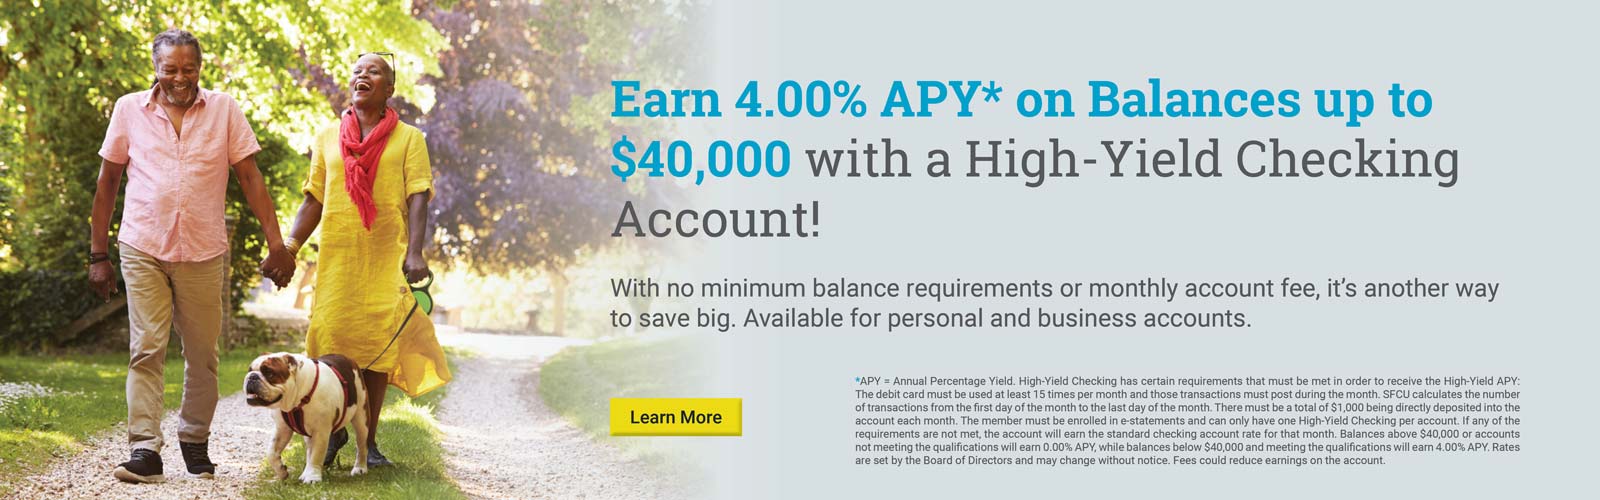 Earn up to 4.00% APY* with a High-Yield Checking Account. 

Plus with no minimum balance requirements or monthly account fee, it's another way to save big.